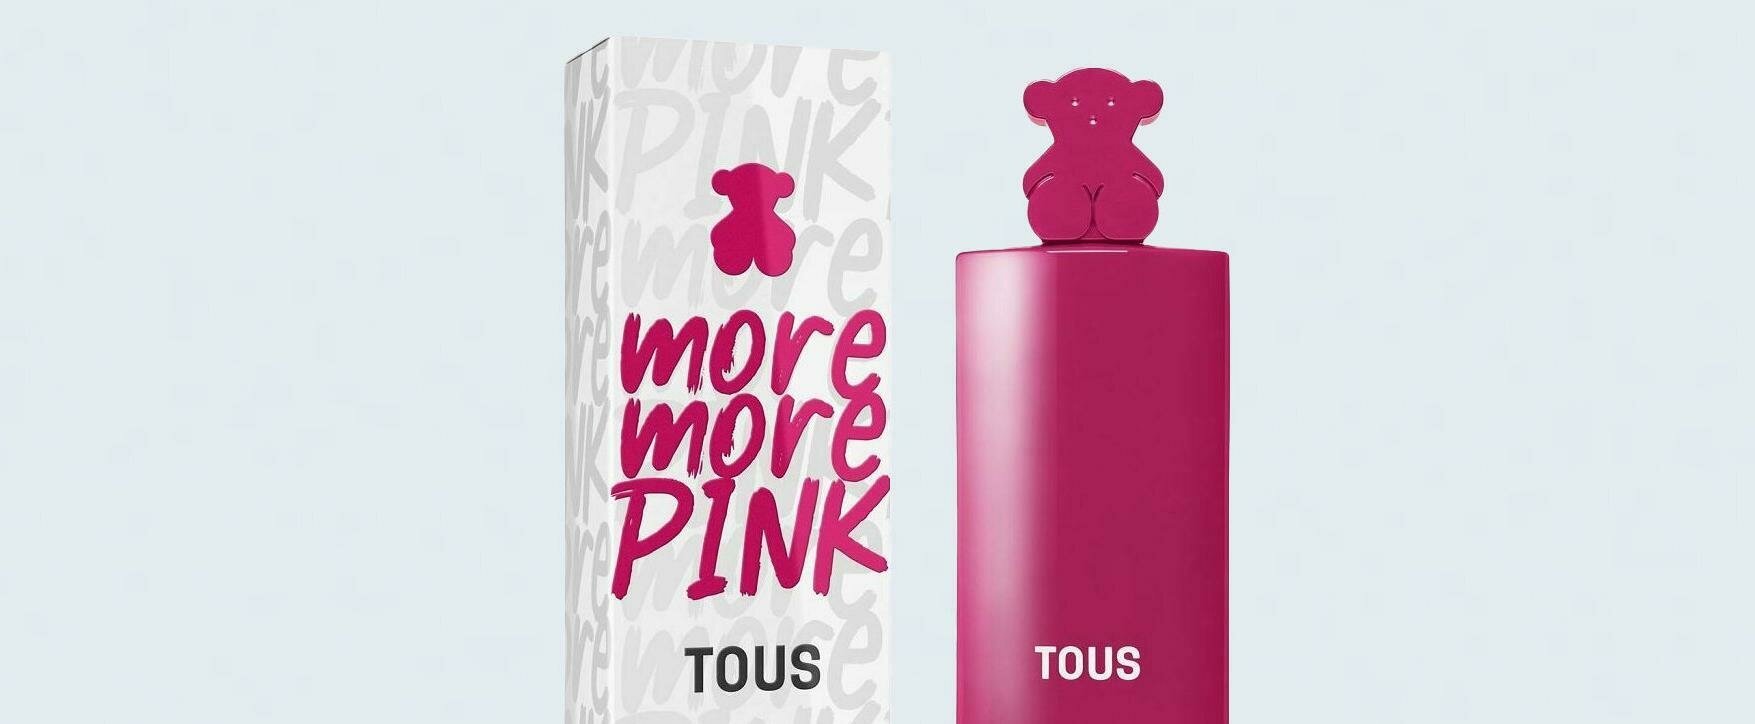 Pink, Fresh and Feminine: The New Fragrance “More More Pink” by Tous